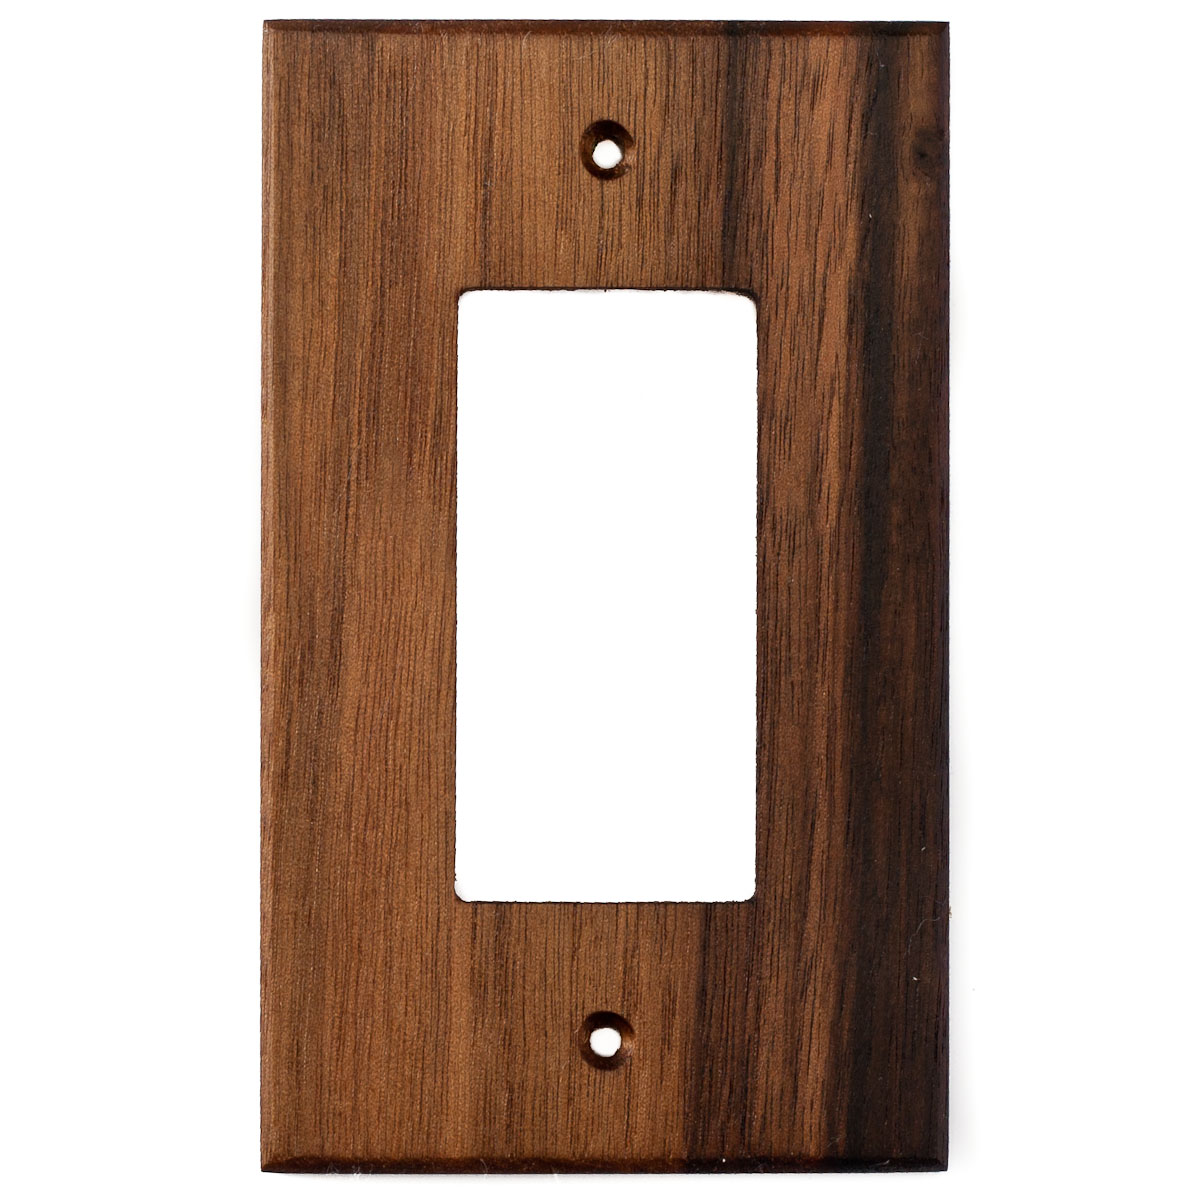 Black Walnut Wood Wall Plate - 1 Gang GFCI Outlet Cover